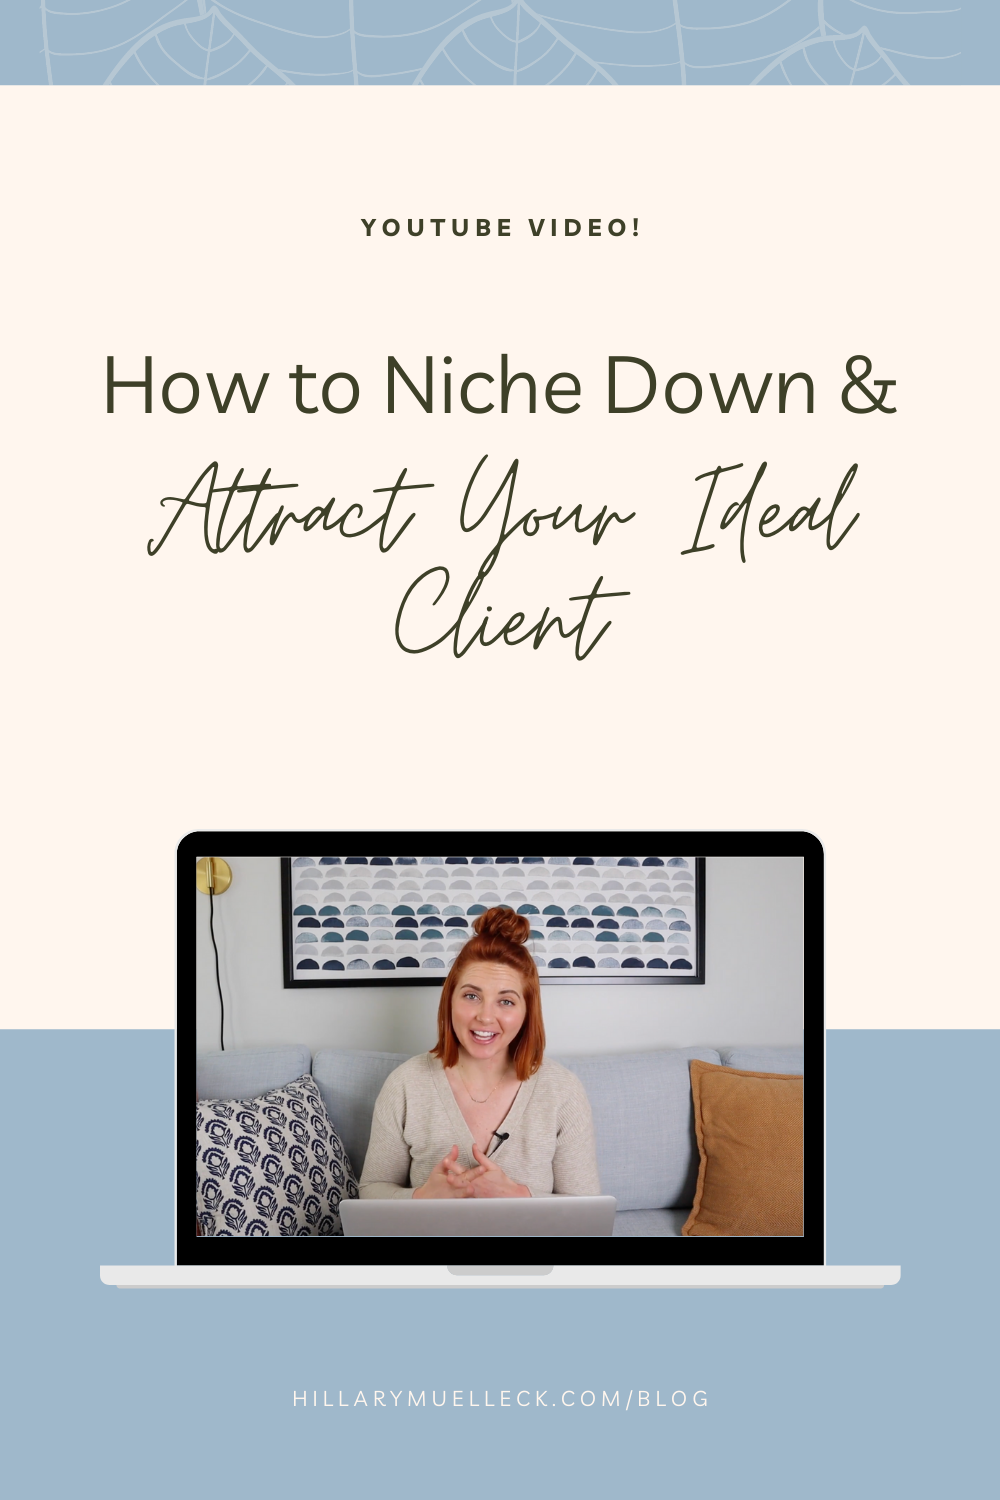 Attract Your Ideal Clients on Instagram: tips to niche down on social media so you can reach your ideal client as a wedding photographer